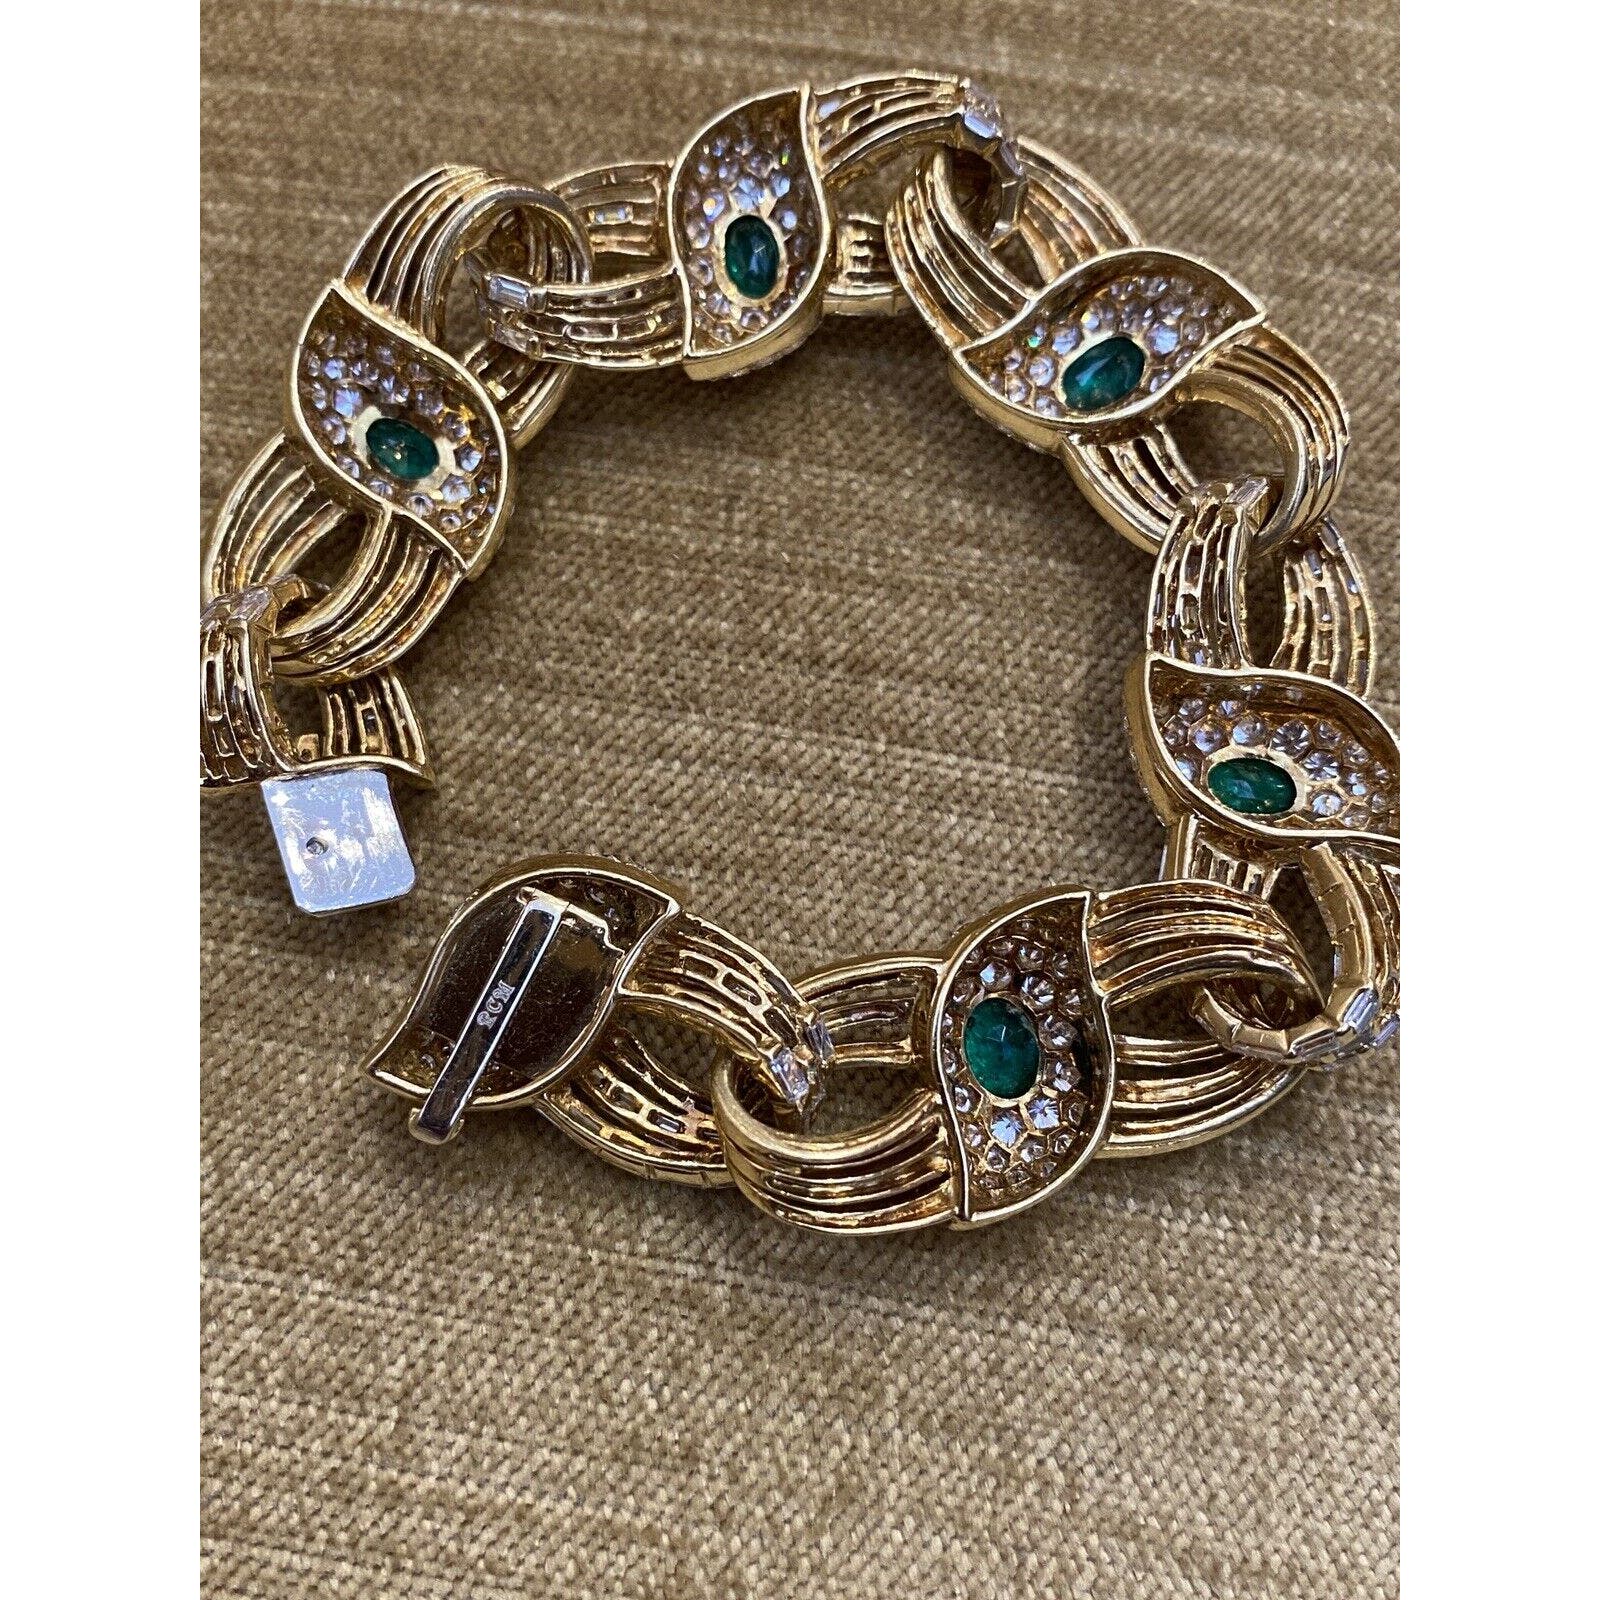 Emerald and Diamond Link Statement Bracelet by RCM in18k Yellow Gold--HM2372SVA